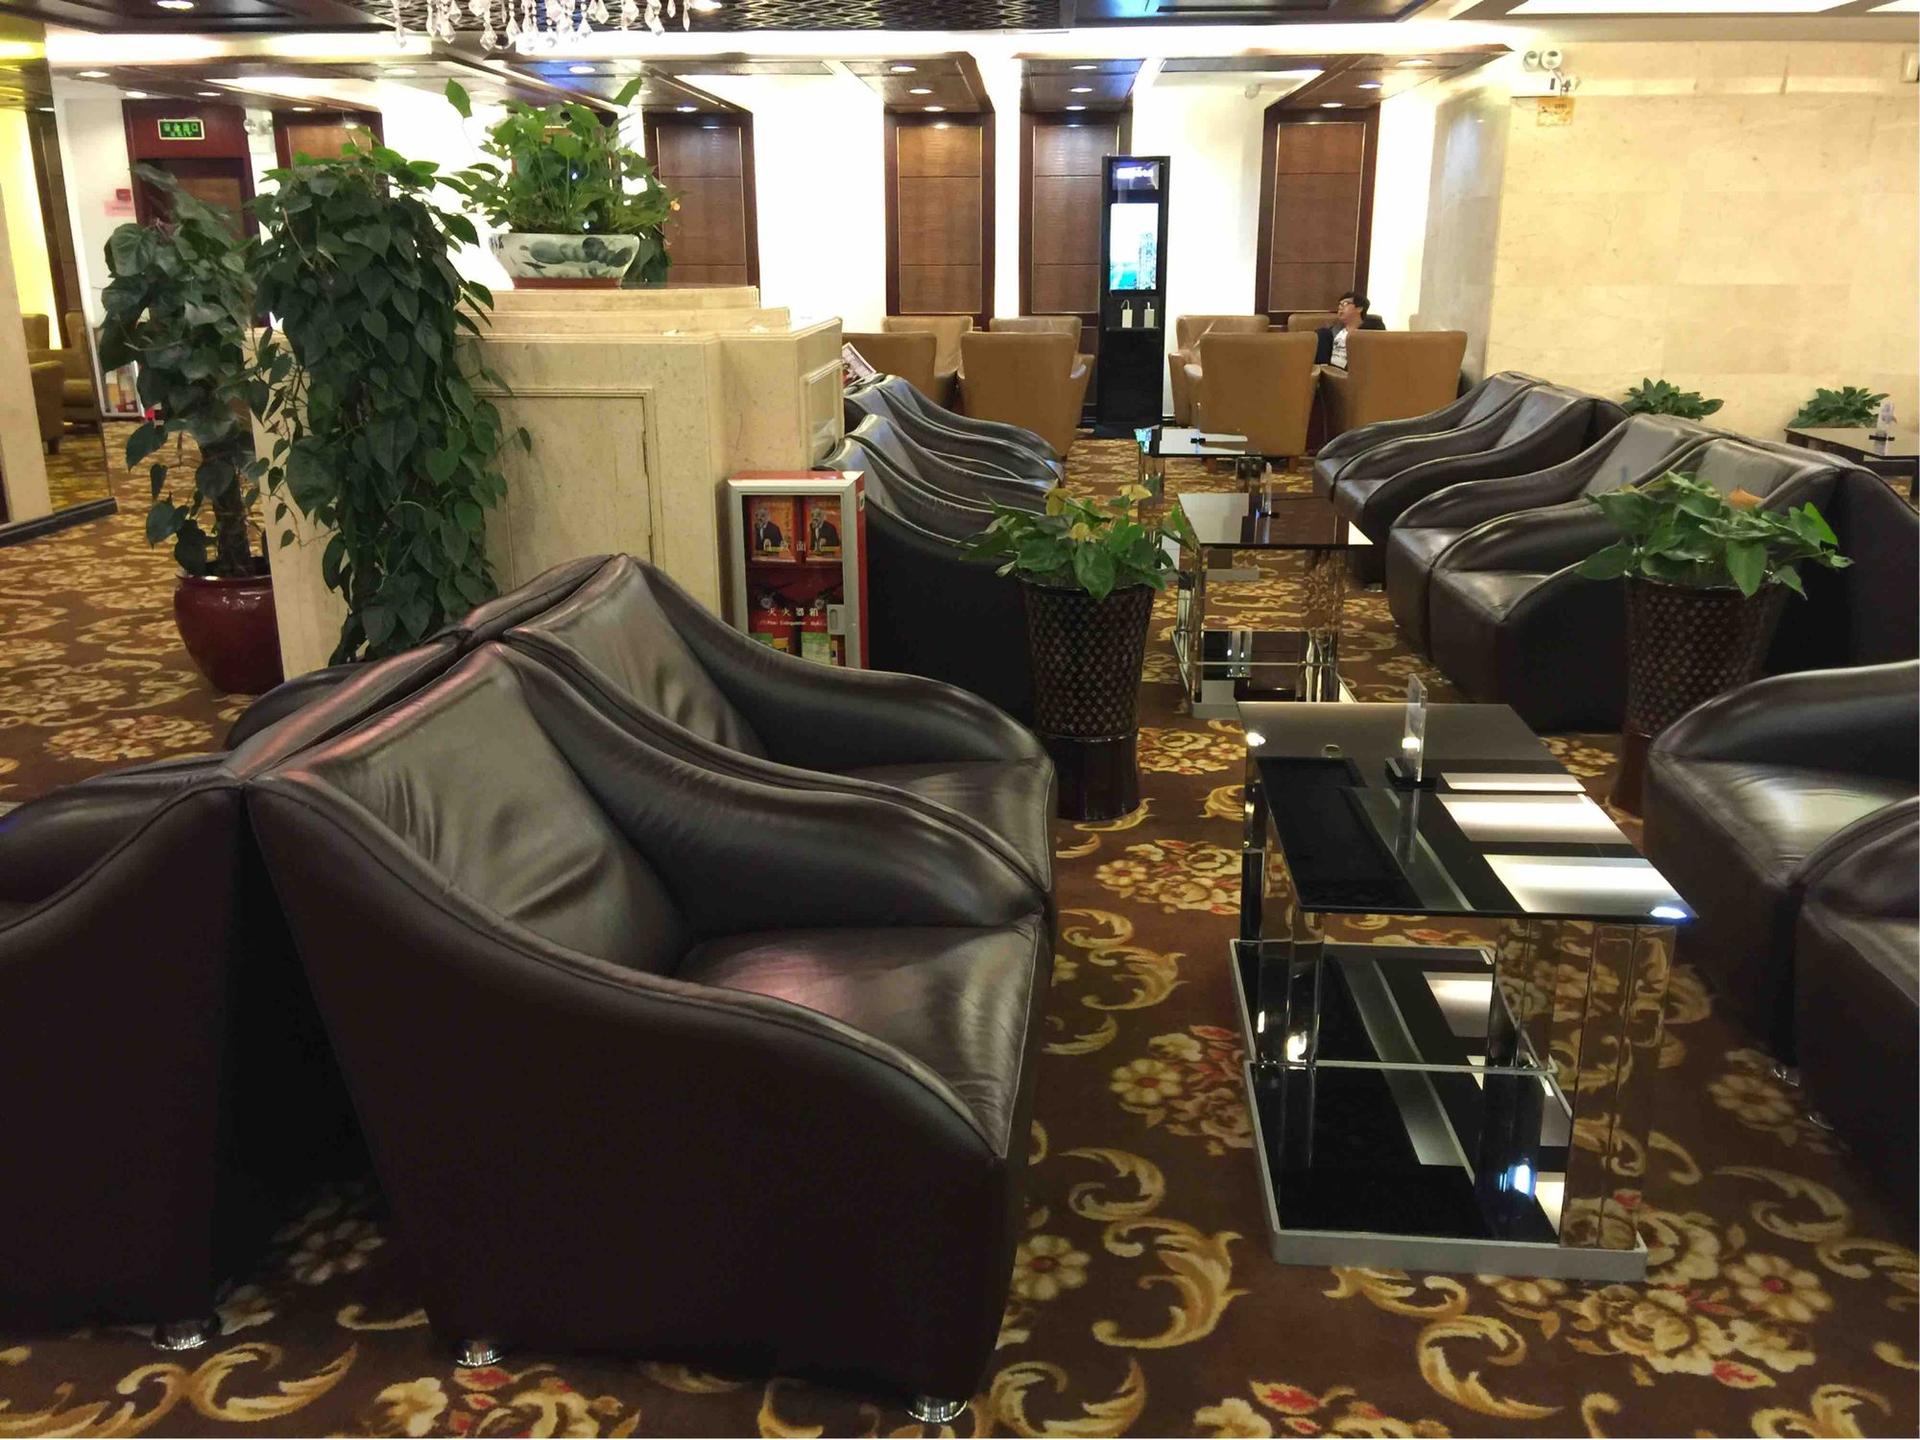 Baiyun Airport First Class Lounge (Closed For Renovation) image 2 of 11